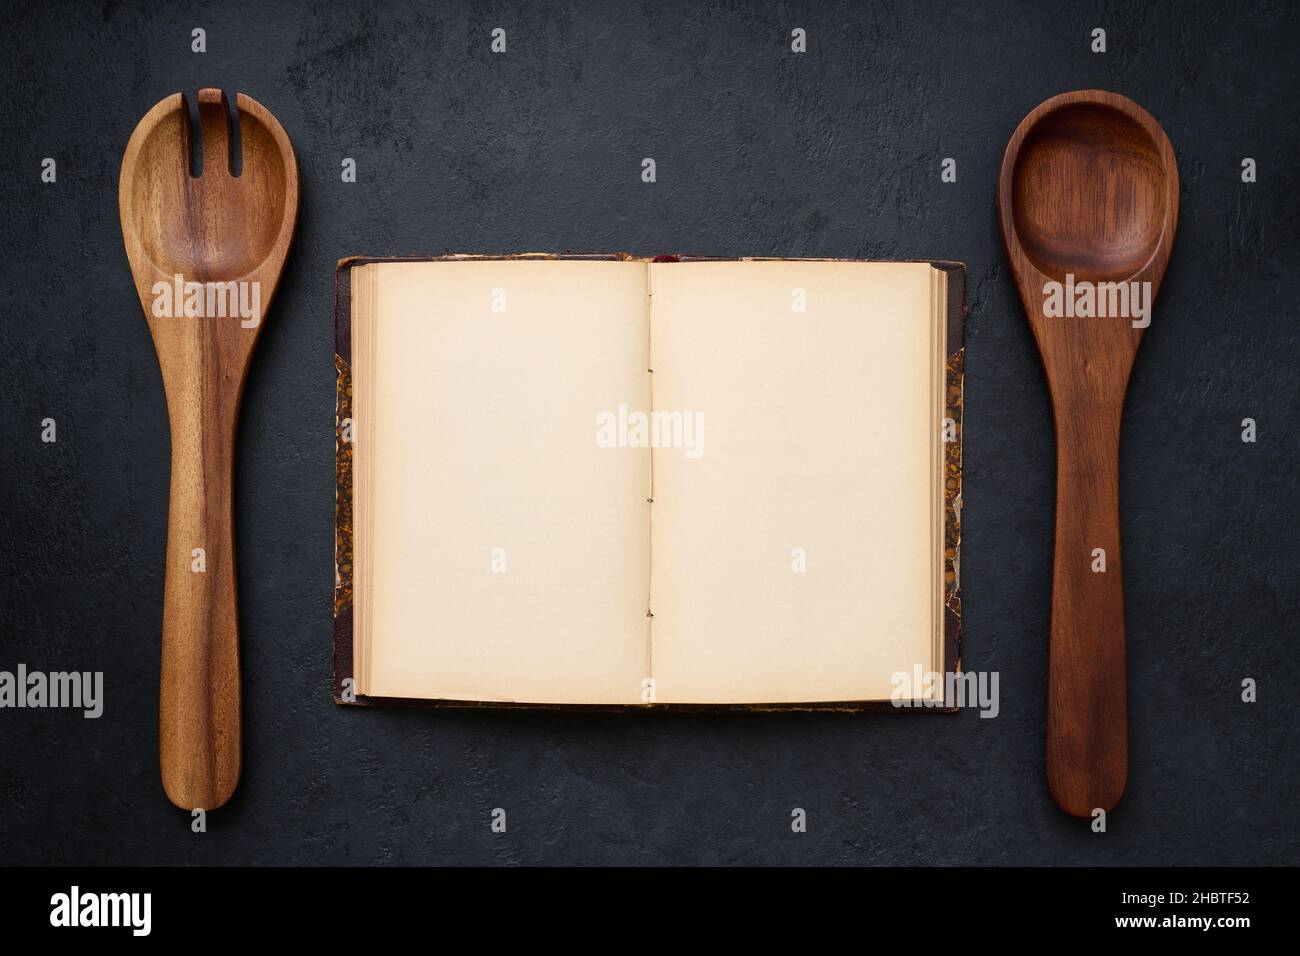 https://c8.alamy.com/comp/2HBTF52/open-antique-cookbook-with-blank-pages-and-two-wooden-spoons-top-view-layout-2HBTF52.jpg